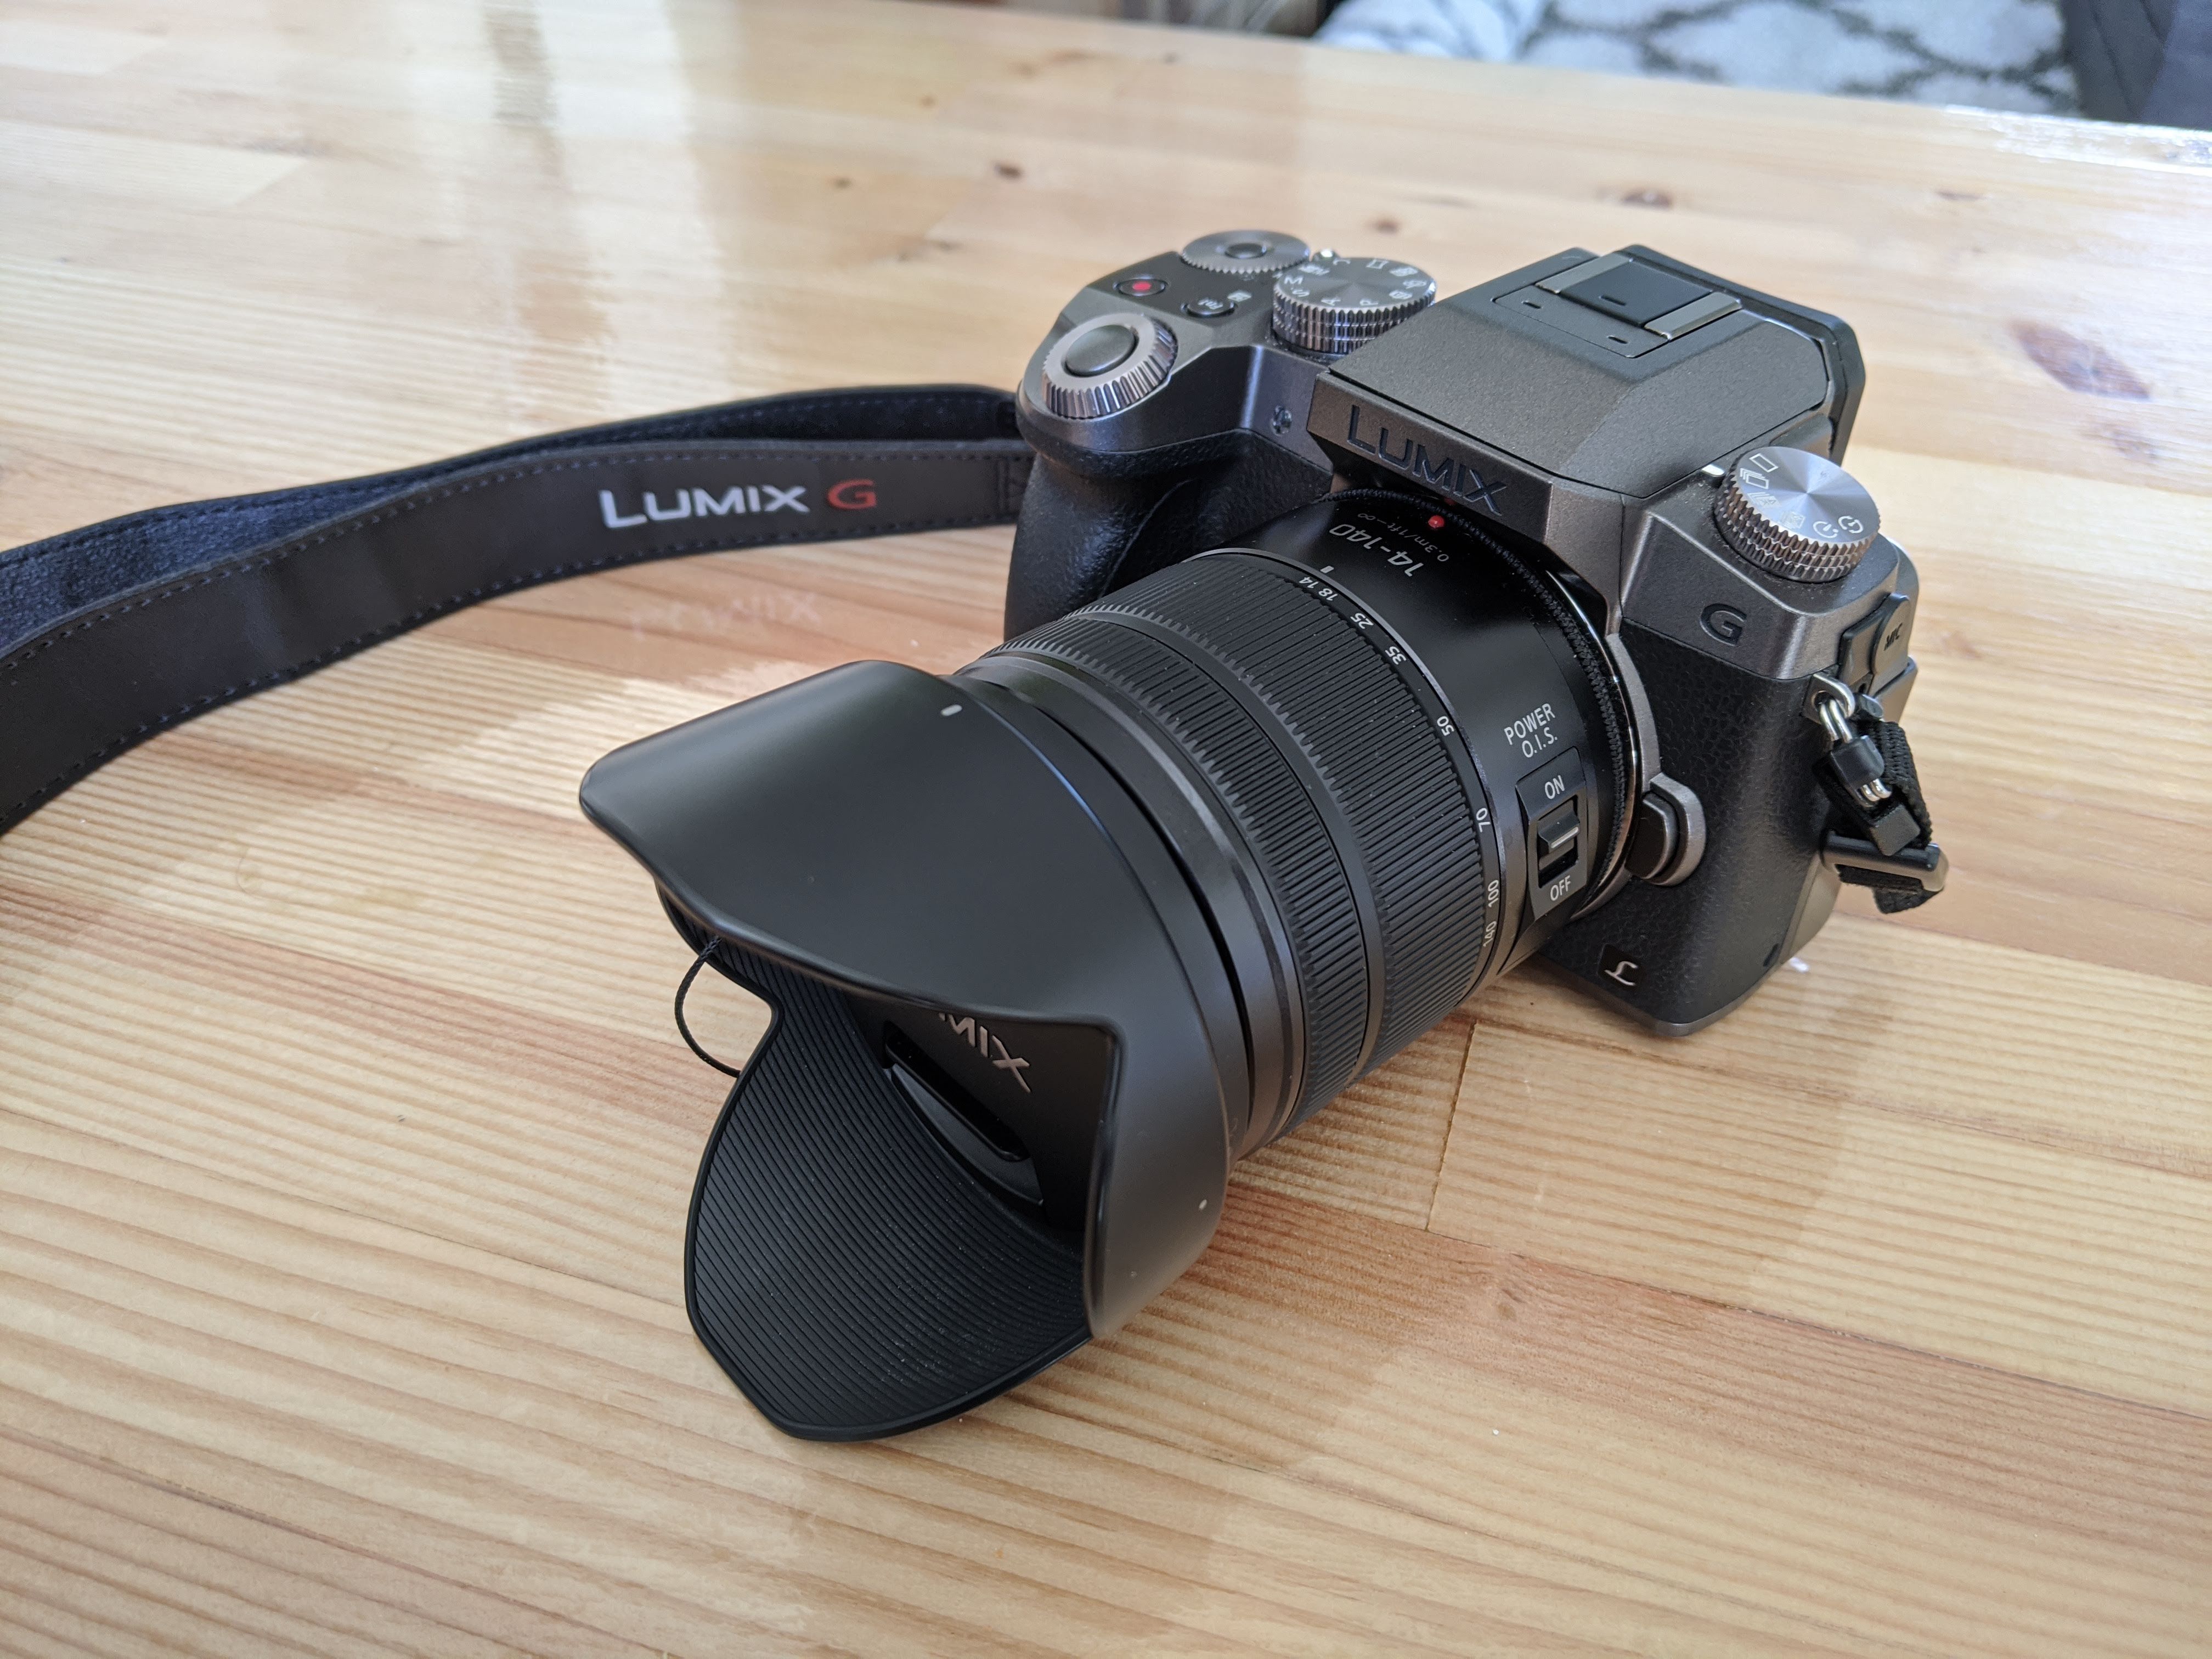 Panasonic Lumix G7 with 14-140mm lens and accessories